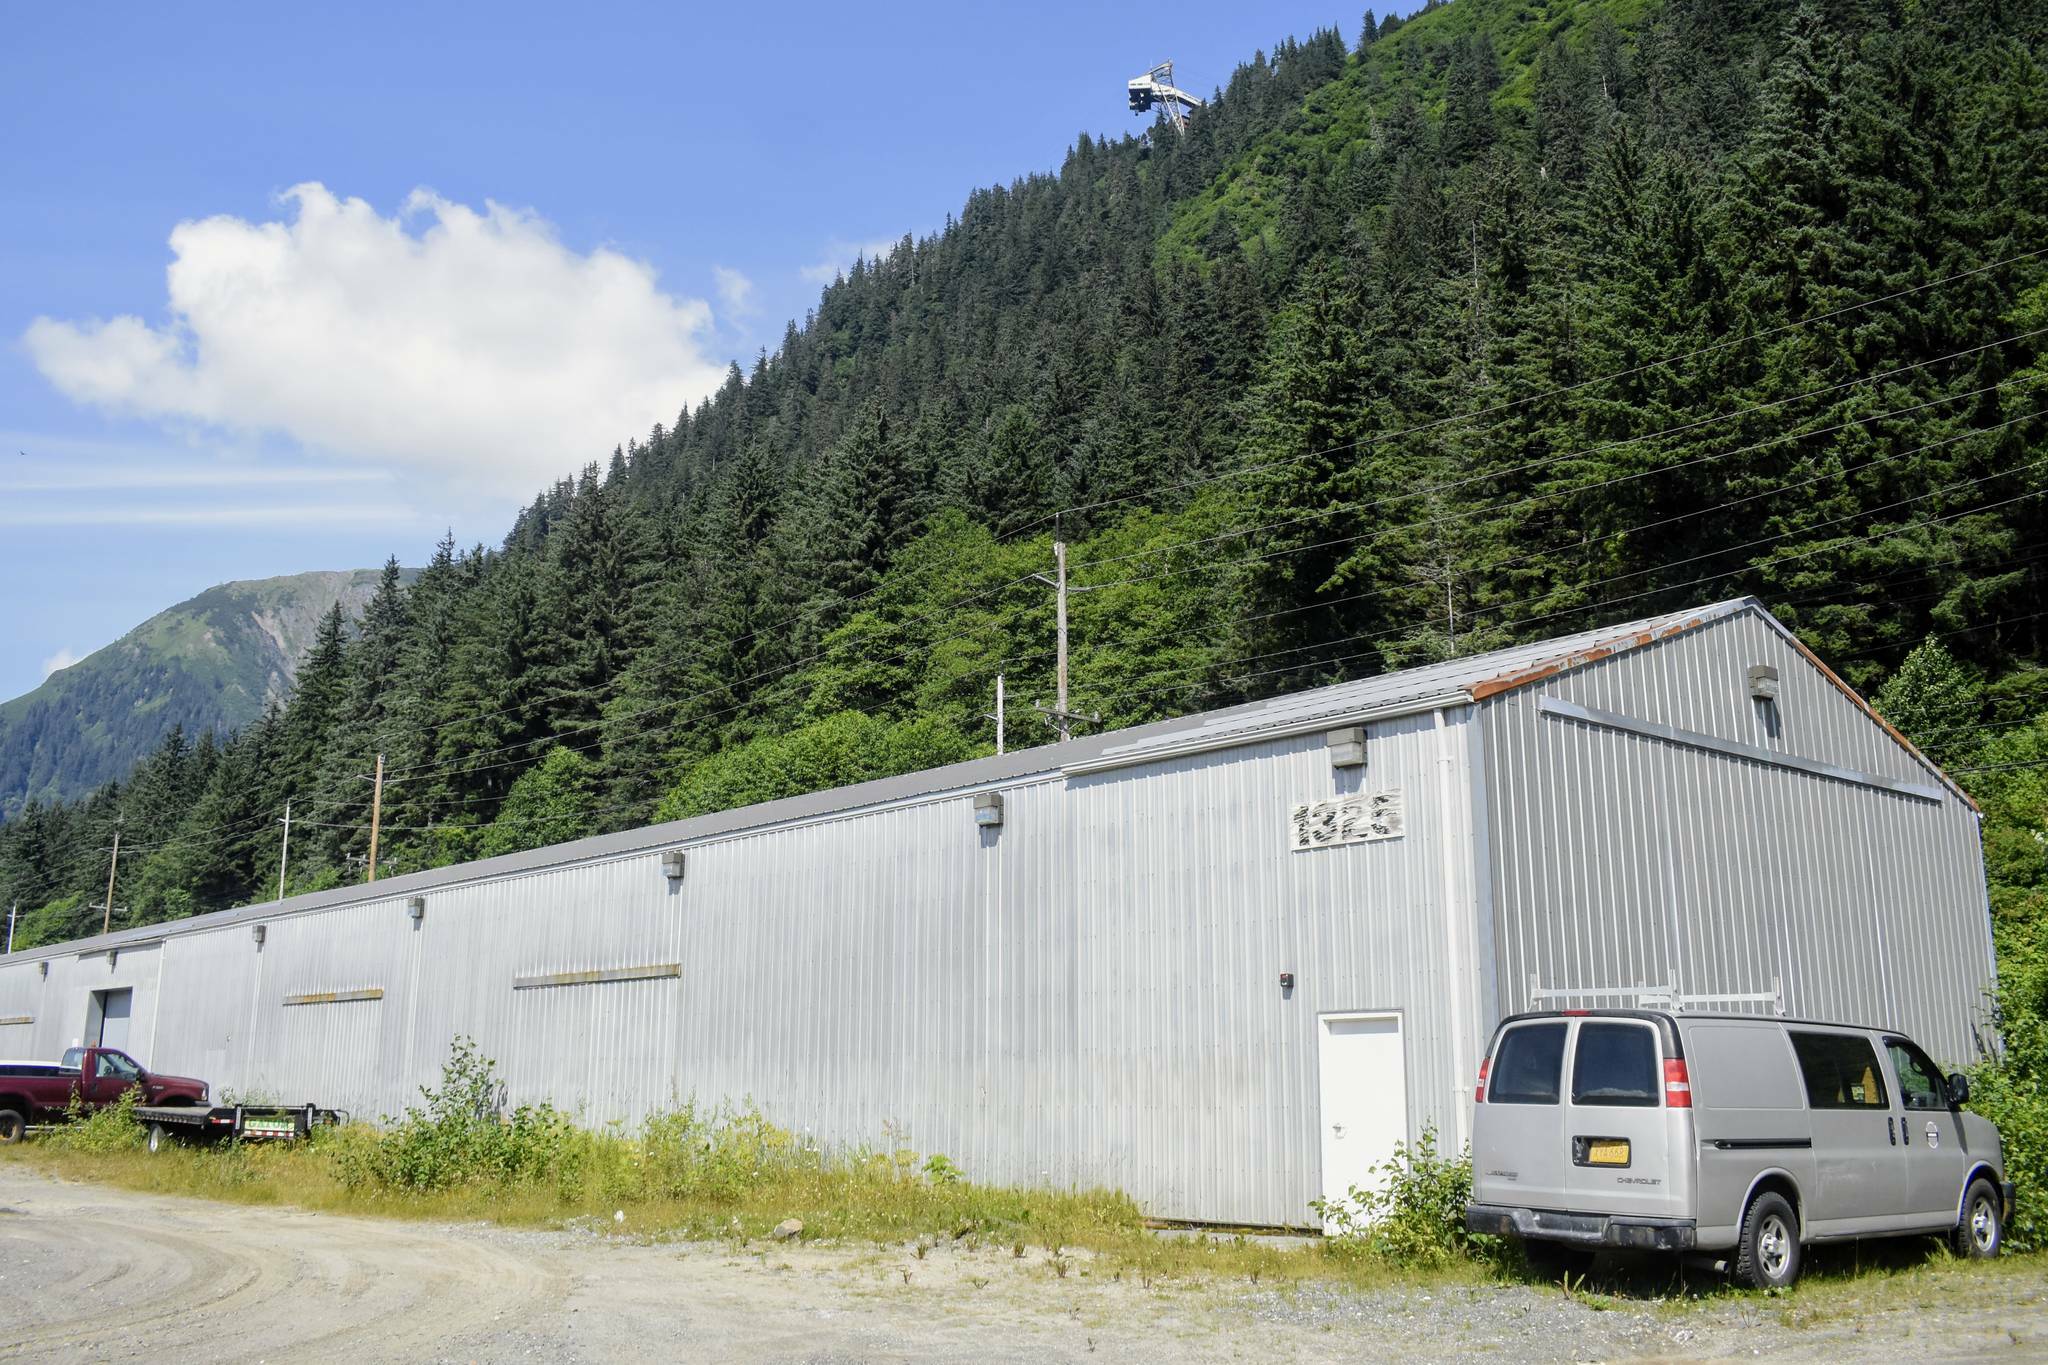 A former surplus warehouse at 1325 Eastaugh Way, seen here in 2021 and now used as a city election ballot processing center, is the current preferred location of a winter warming shelter, officials said Monday. (Peter Segall / Juneau Empire File)